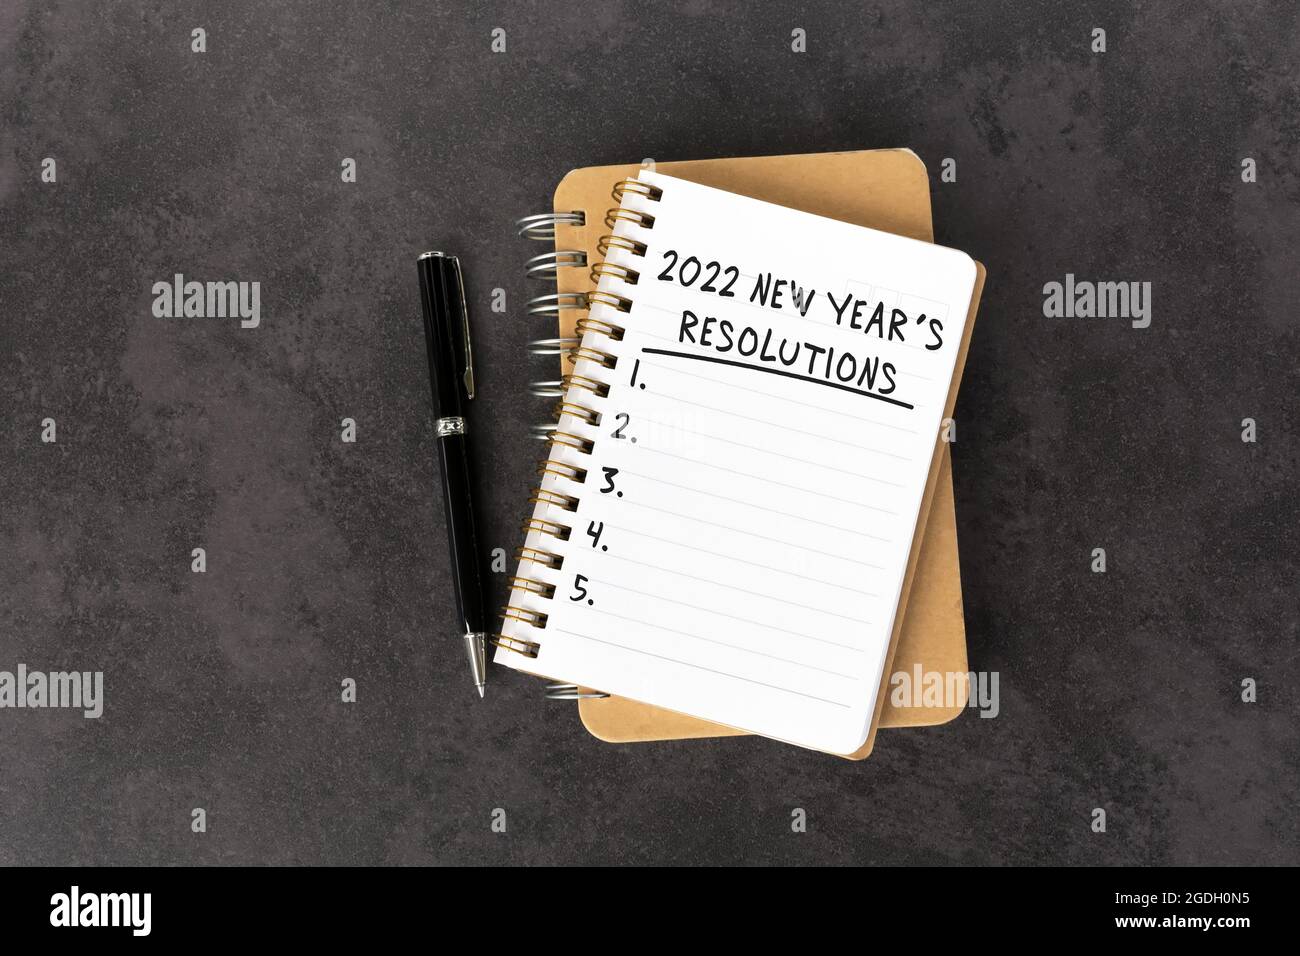 2022 New Year's Resolutions Text on Note Pad Stock Photo